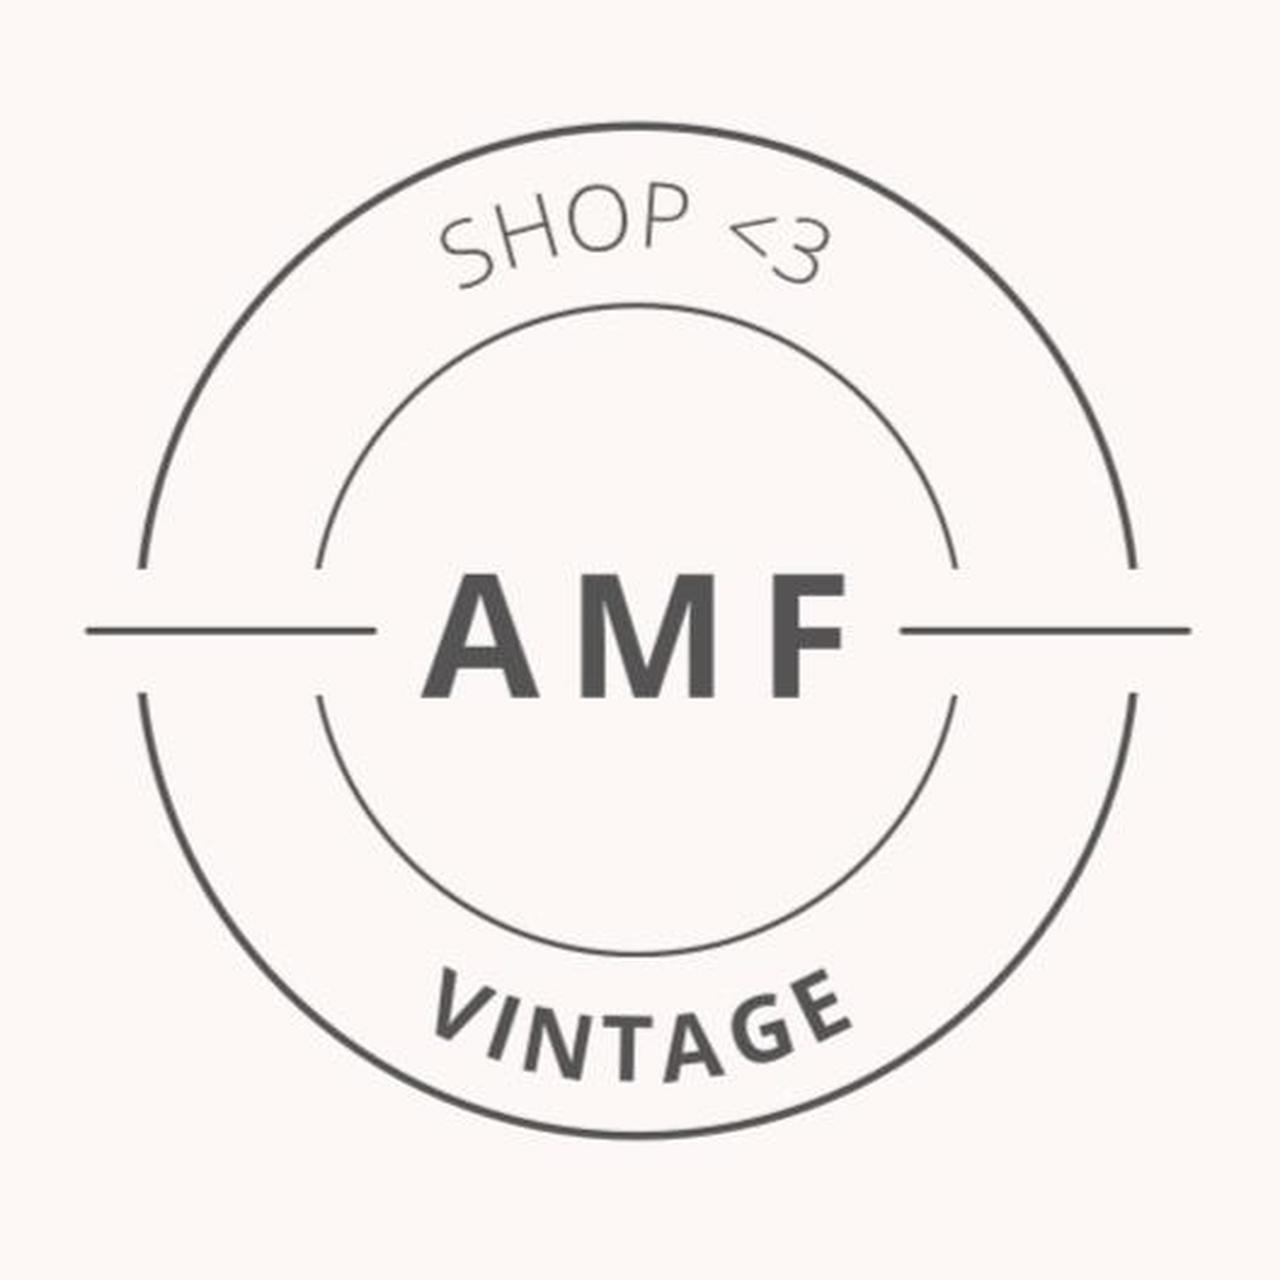 Product Image 1 - About AMF VINTAGE. 

Welcome to